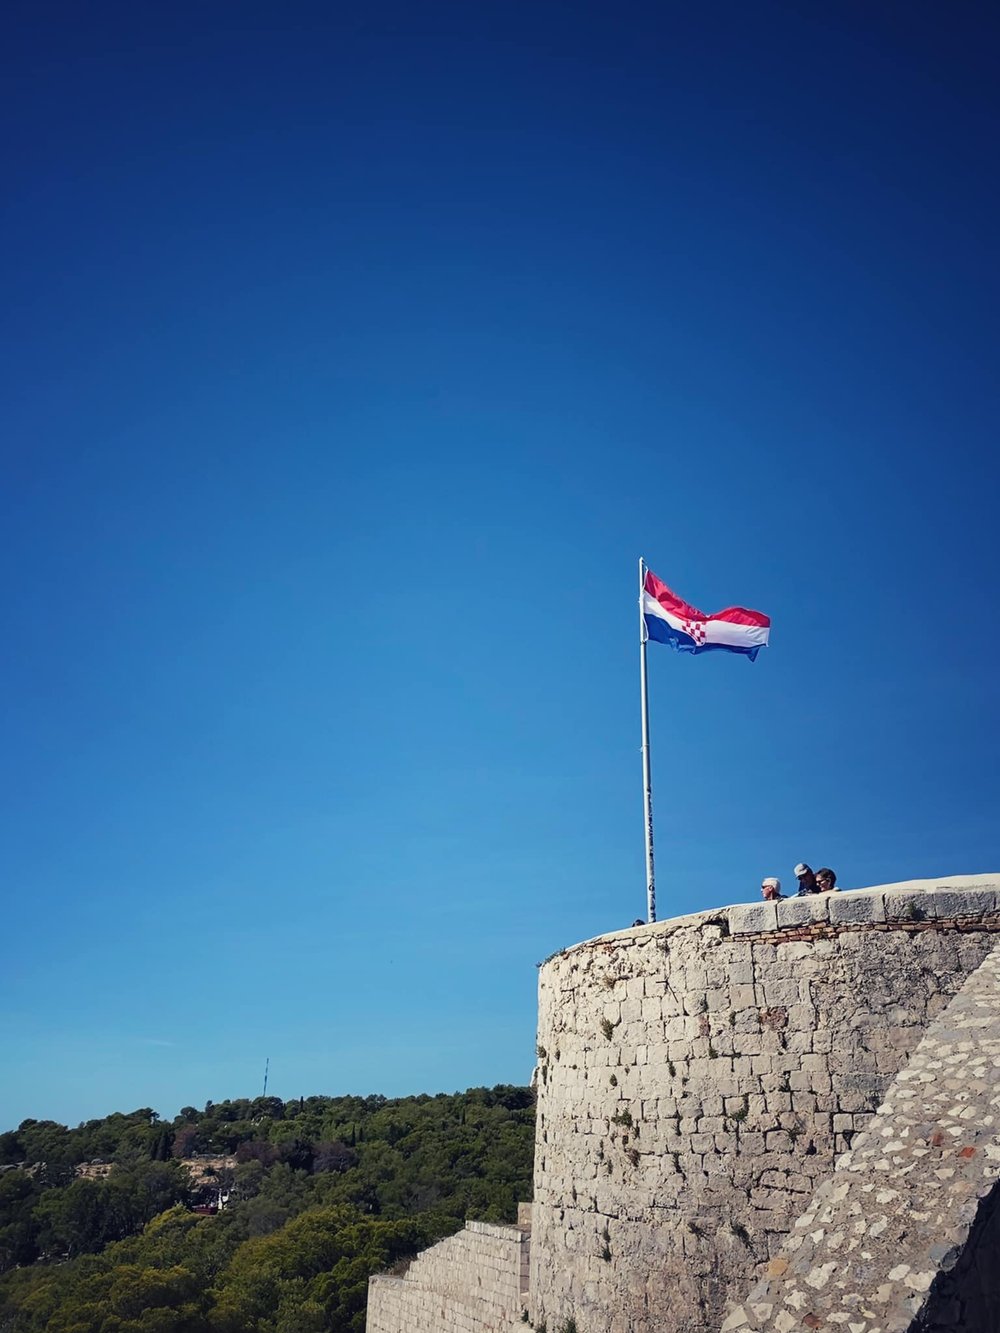  The fort’s construction began in 1278, when Hvar was under Venetian rule, though it’s been rebuilt and restored in more recent centuries. 